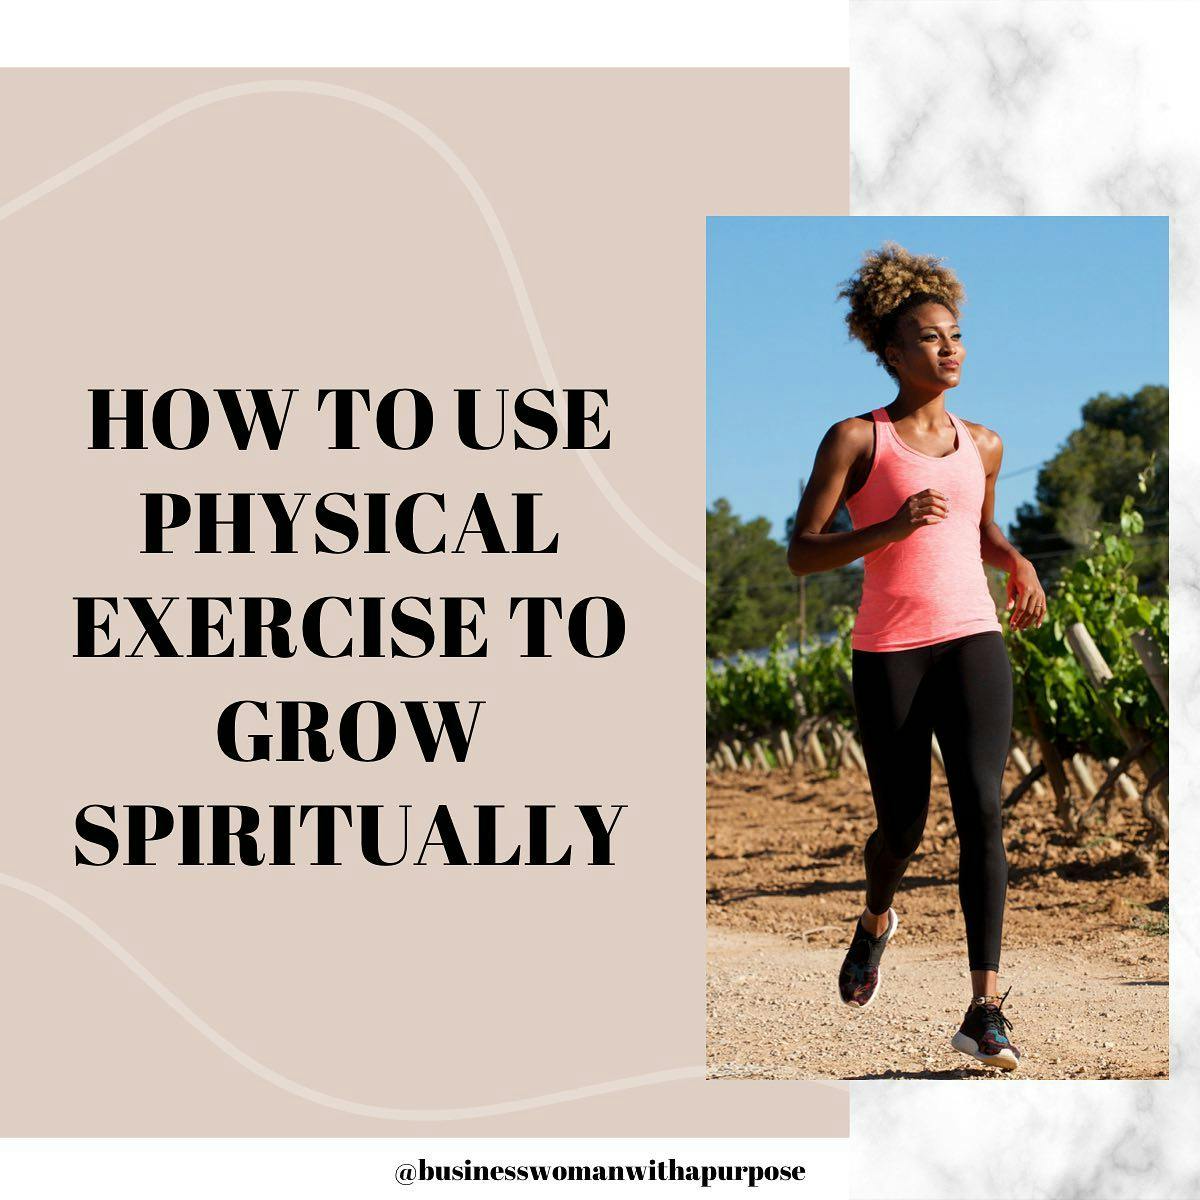 Exercise has many benefits. Not only can you get stronger physically from exercising, but you can grow spiritually as well. Try these tips to connect with God while you are exercising this week.